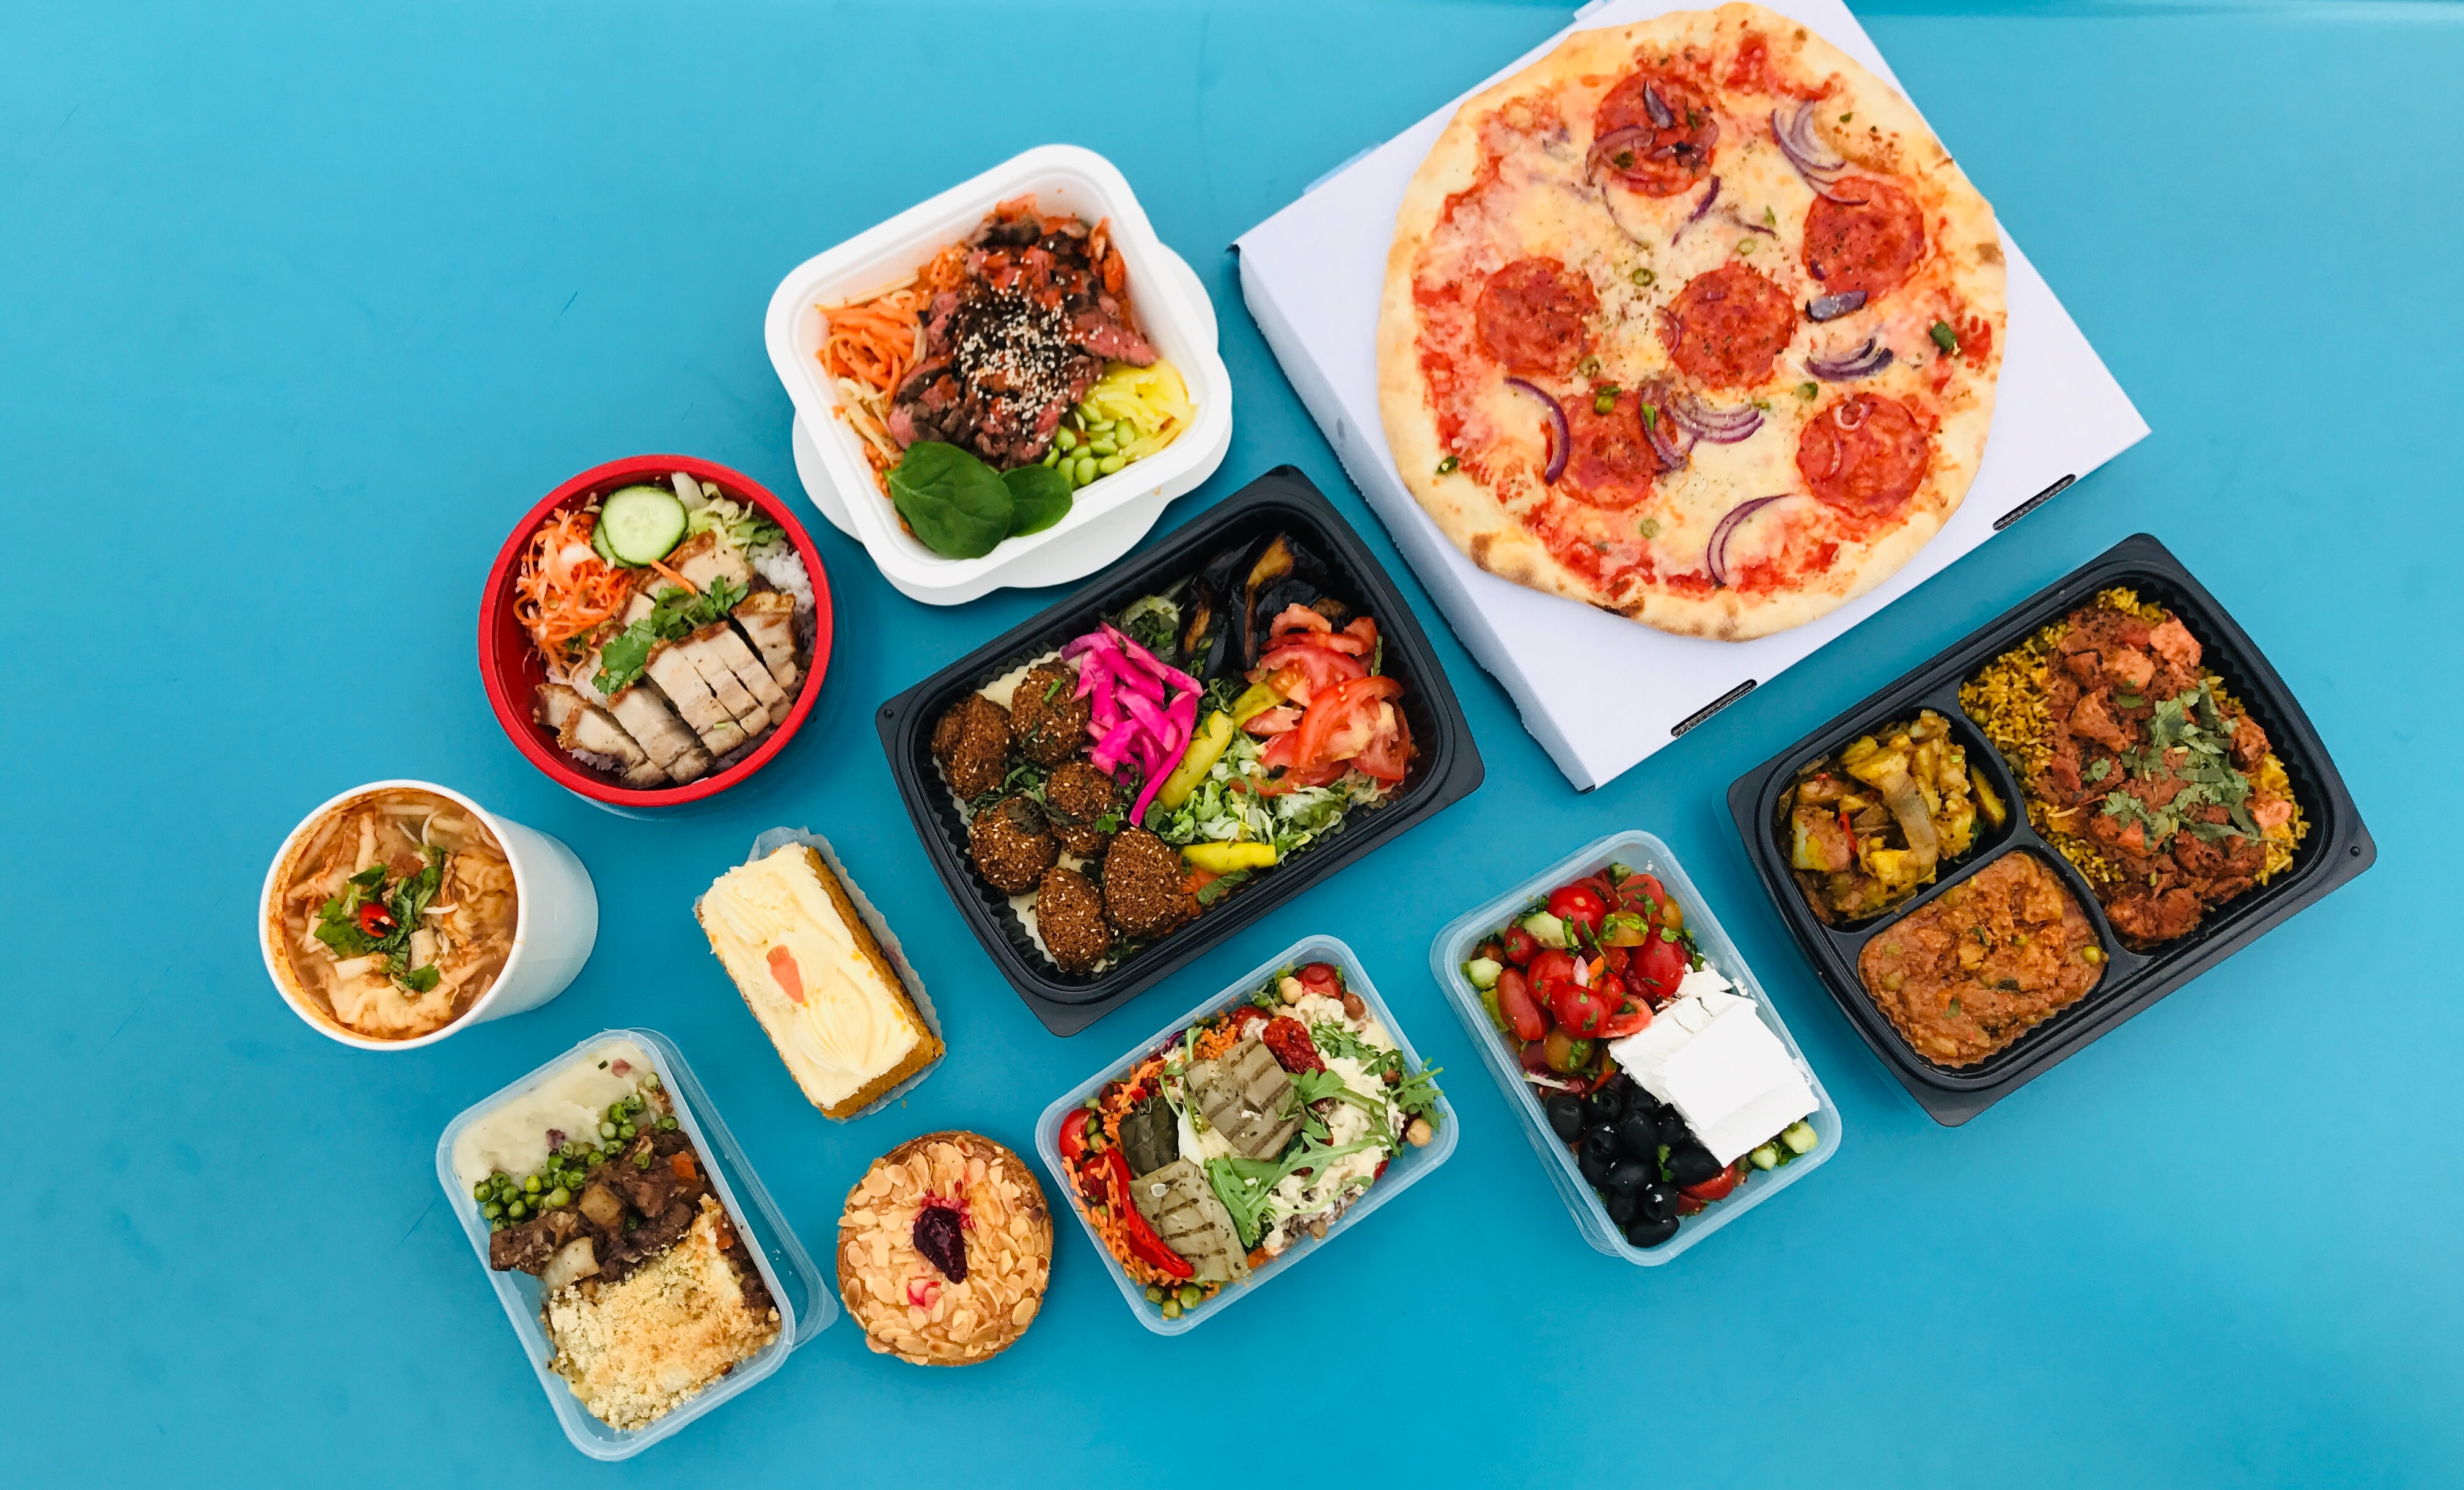 snack boxes feel healthier family meals Health Meal Prep weight loss journey Food Healthy Meals pizza on white ceramic plates